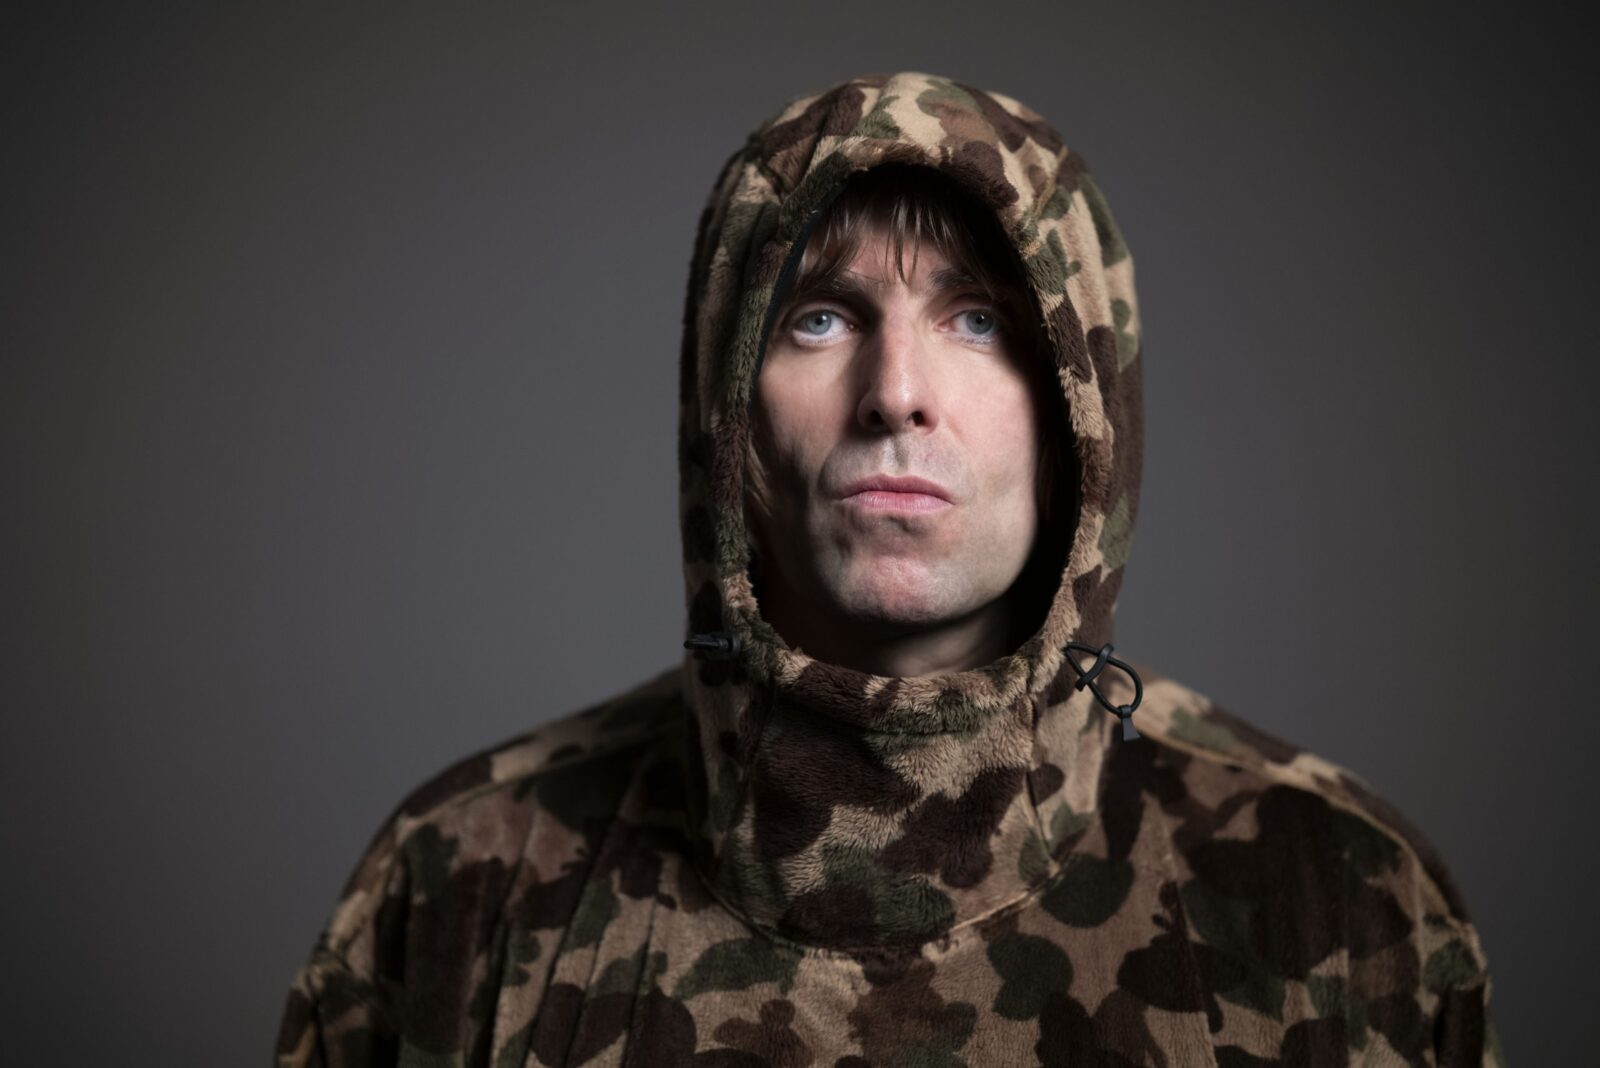 Liam Gallagher at Etihad Stadium Manchester &#8211; tickets, support, stage times and setlist, The Manc